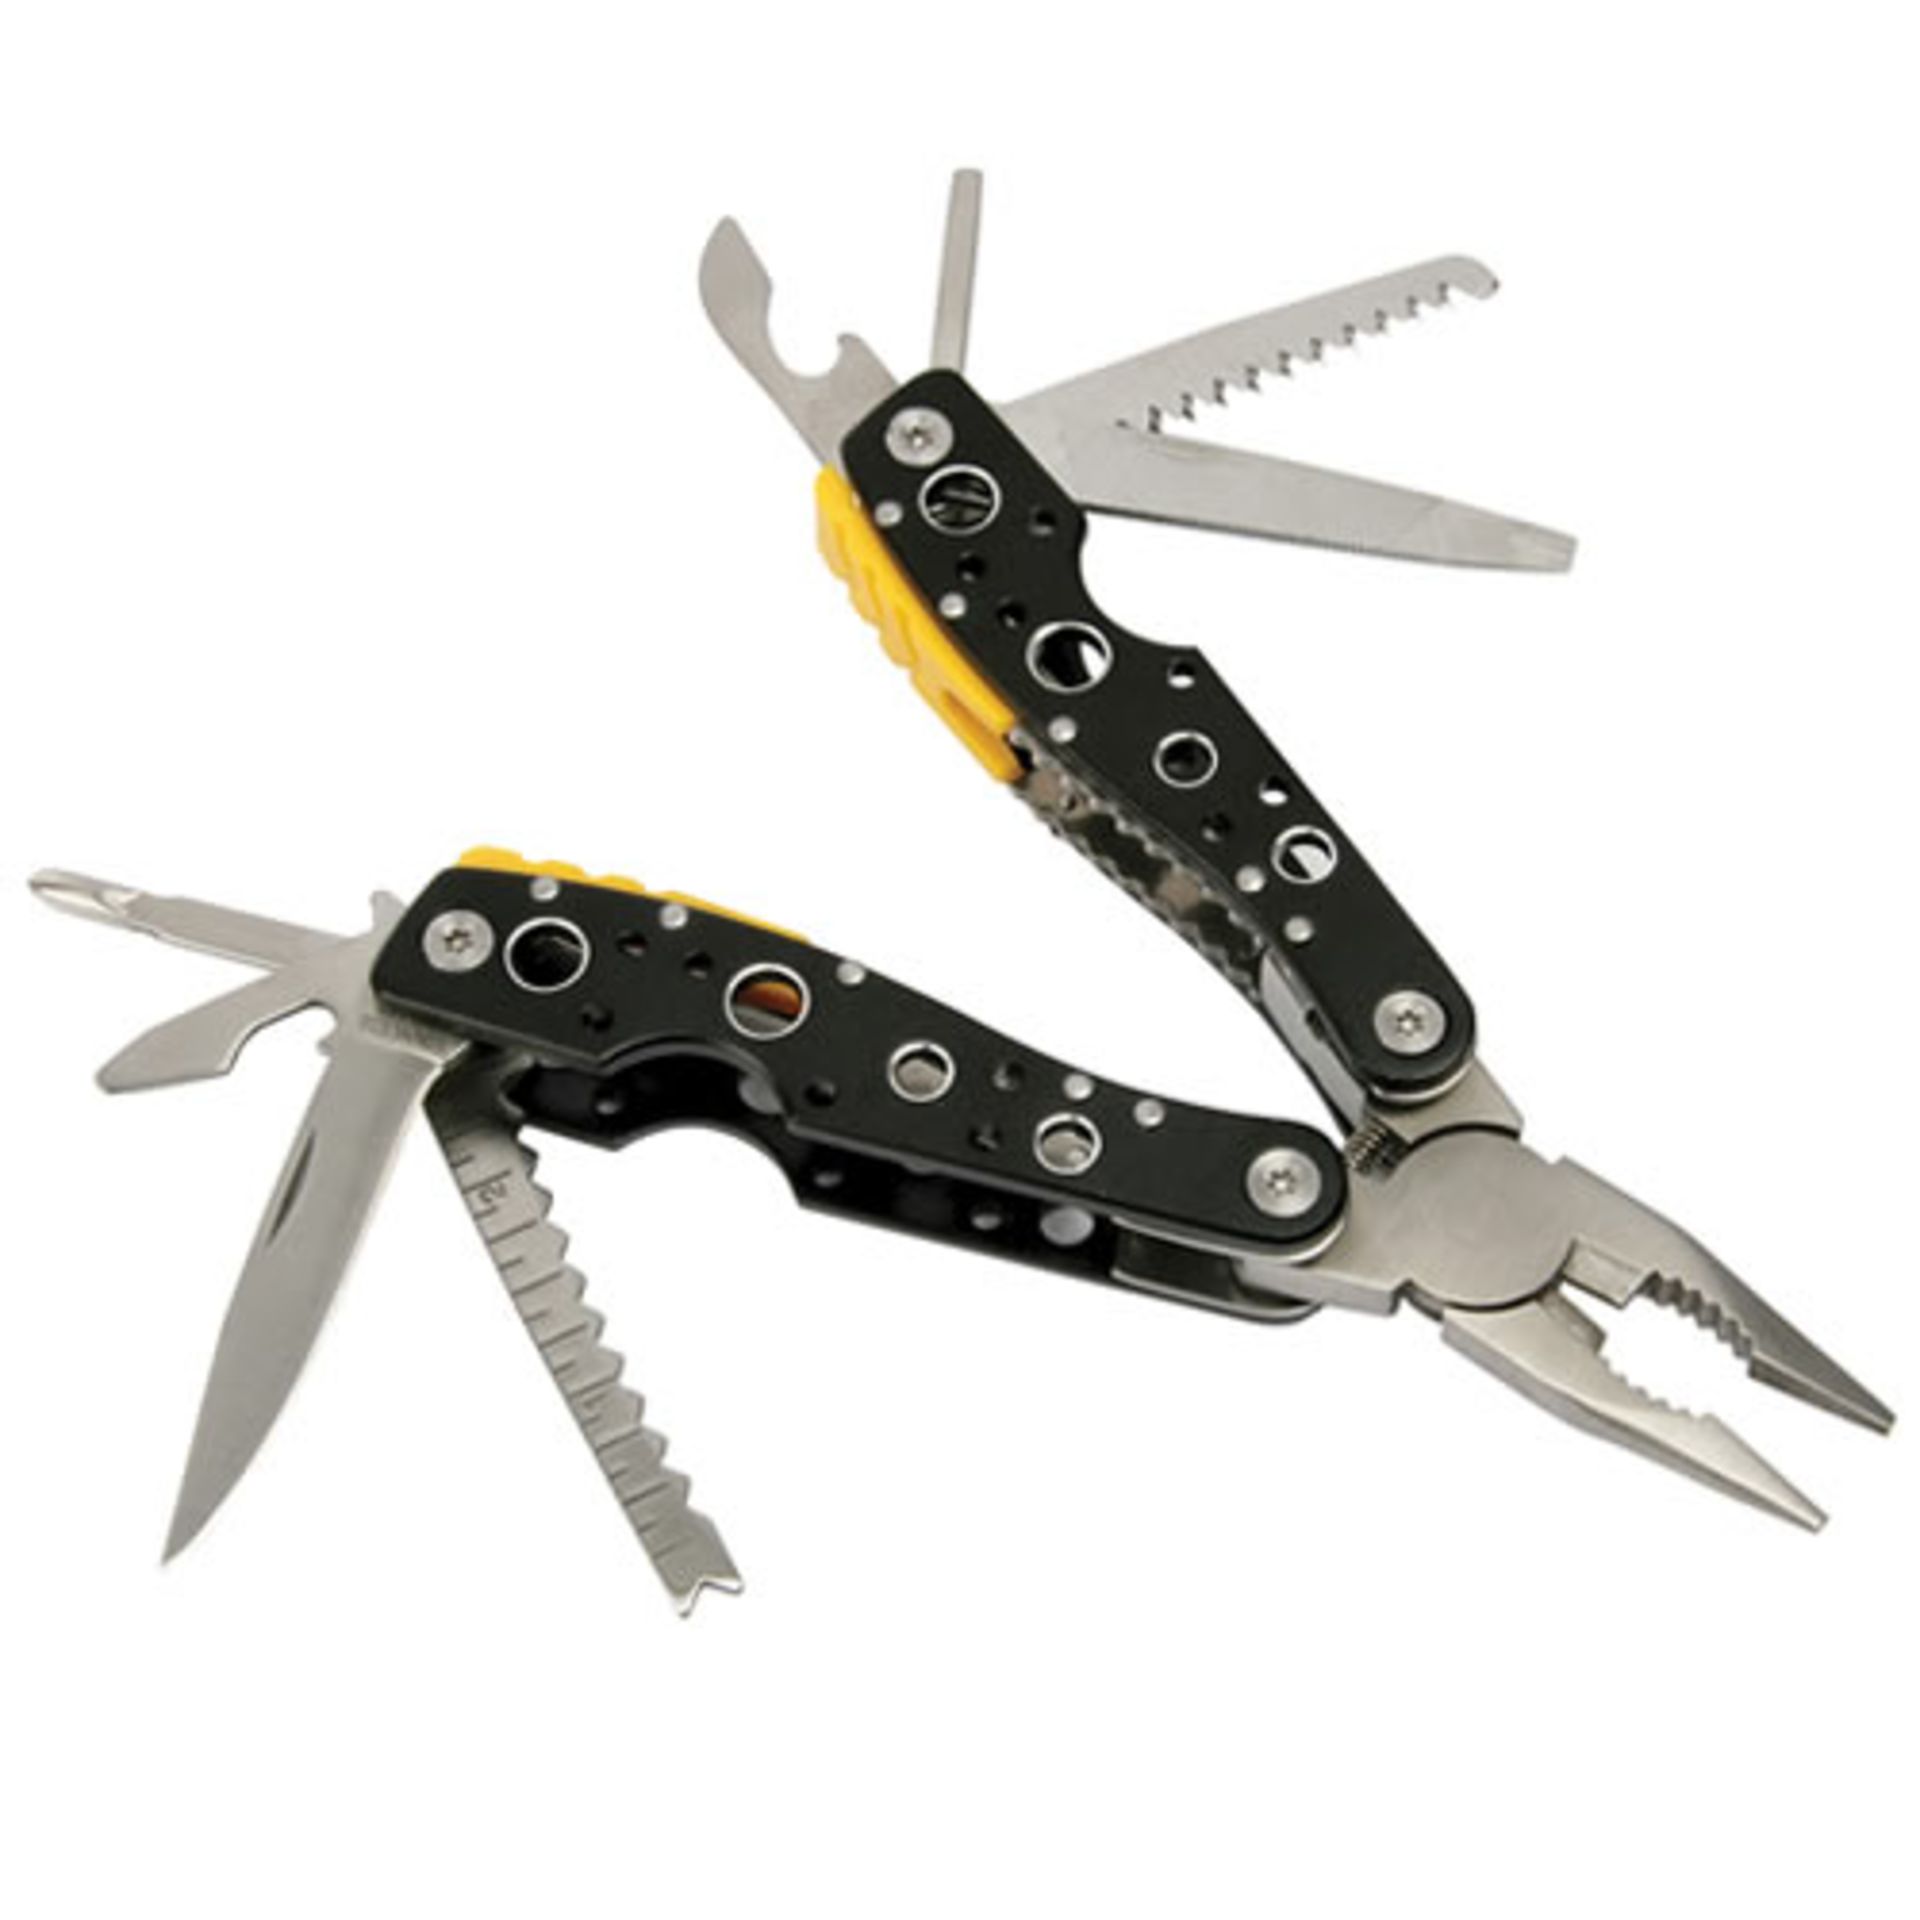 V Grade A 14 In 1 Multitool In Gift Box With Carry Pouch Aluminium Handles With Saw/Knife/Hook/Can